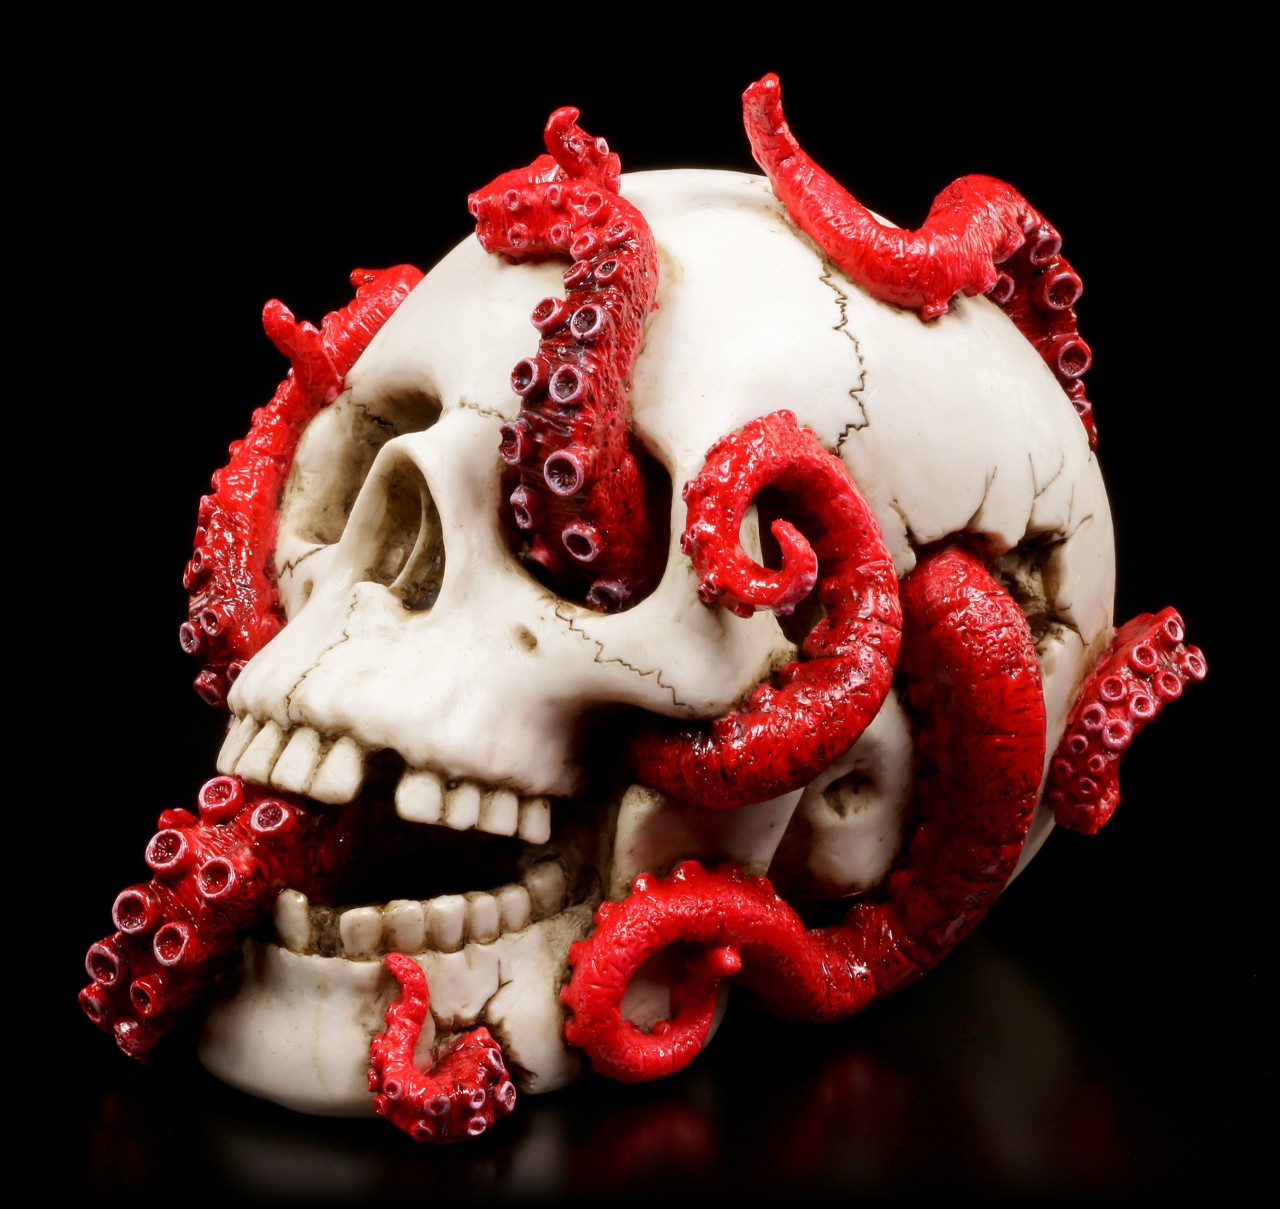 Skull with Tentacles - Devoured